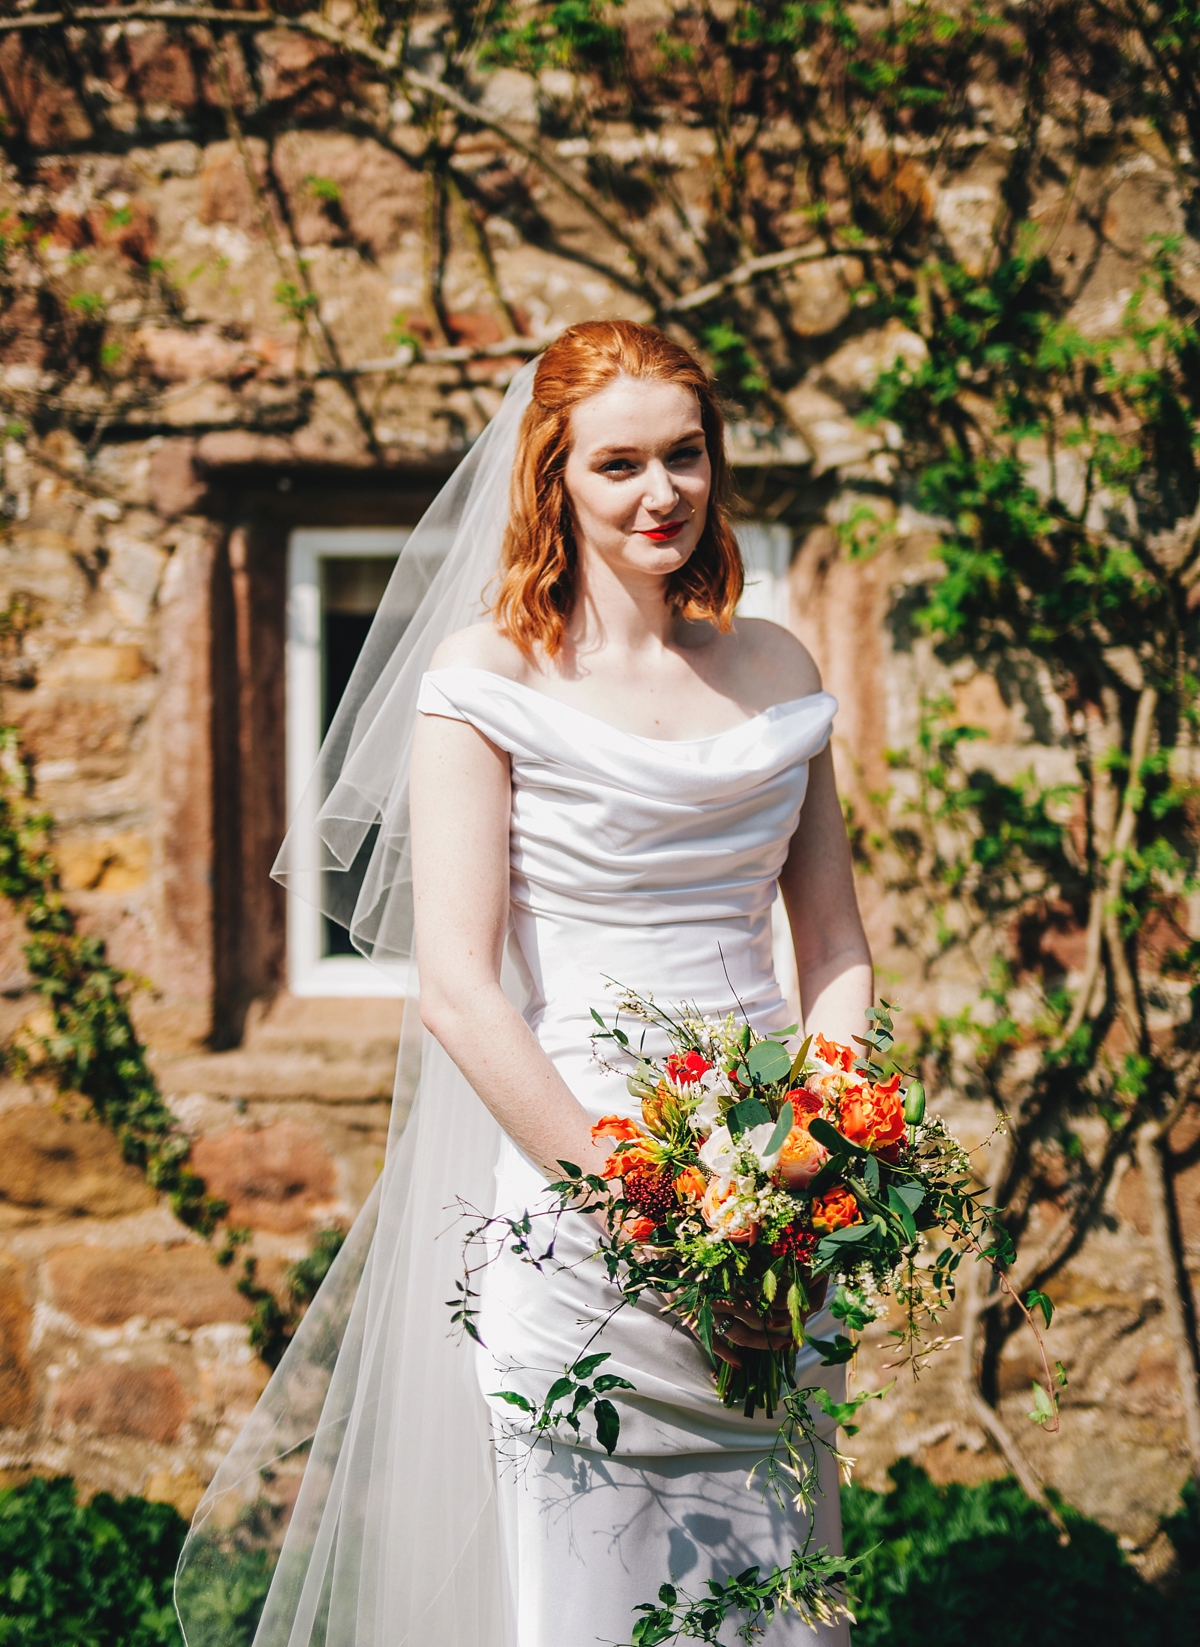 10 A romantic barn wedding and a bespoke dress by The Couture Co of Birmingham